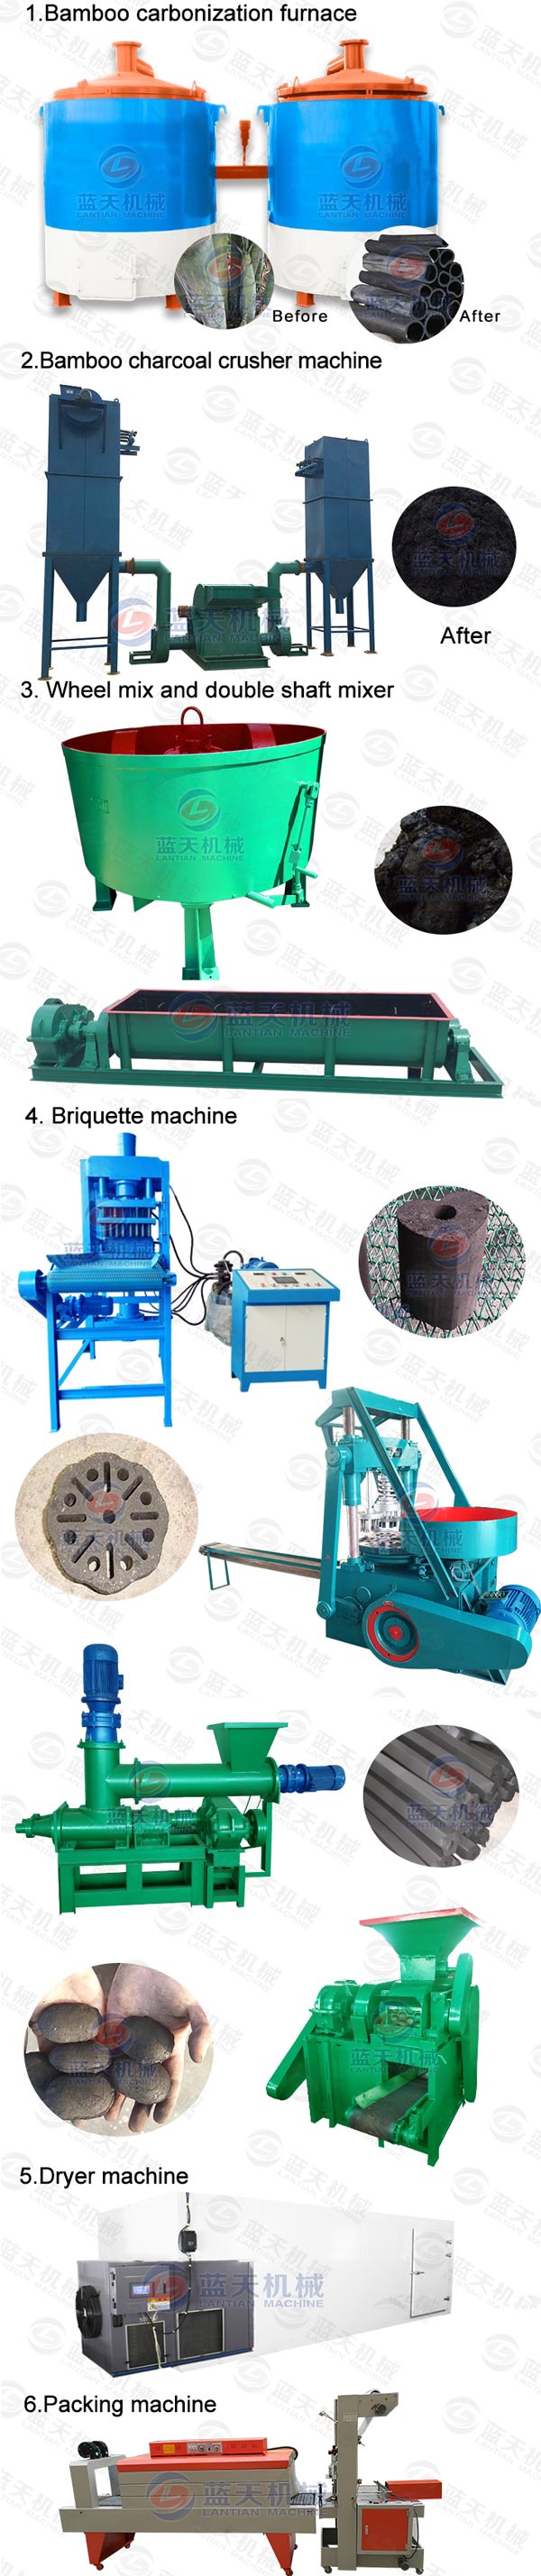  Product Line of Bamboo Carbonization Furnace